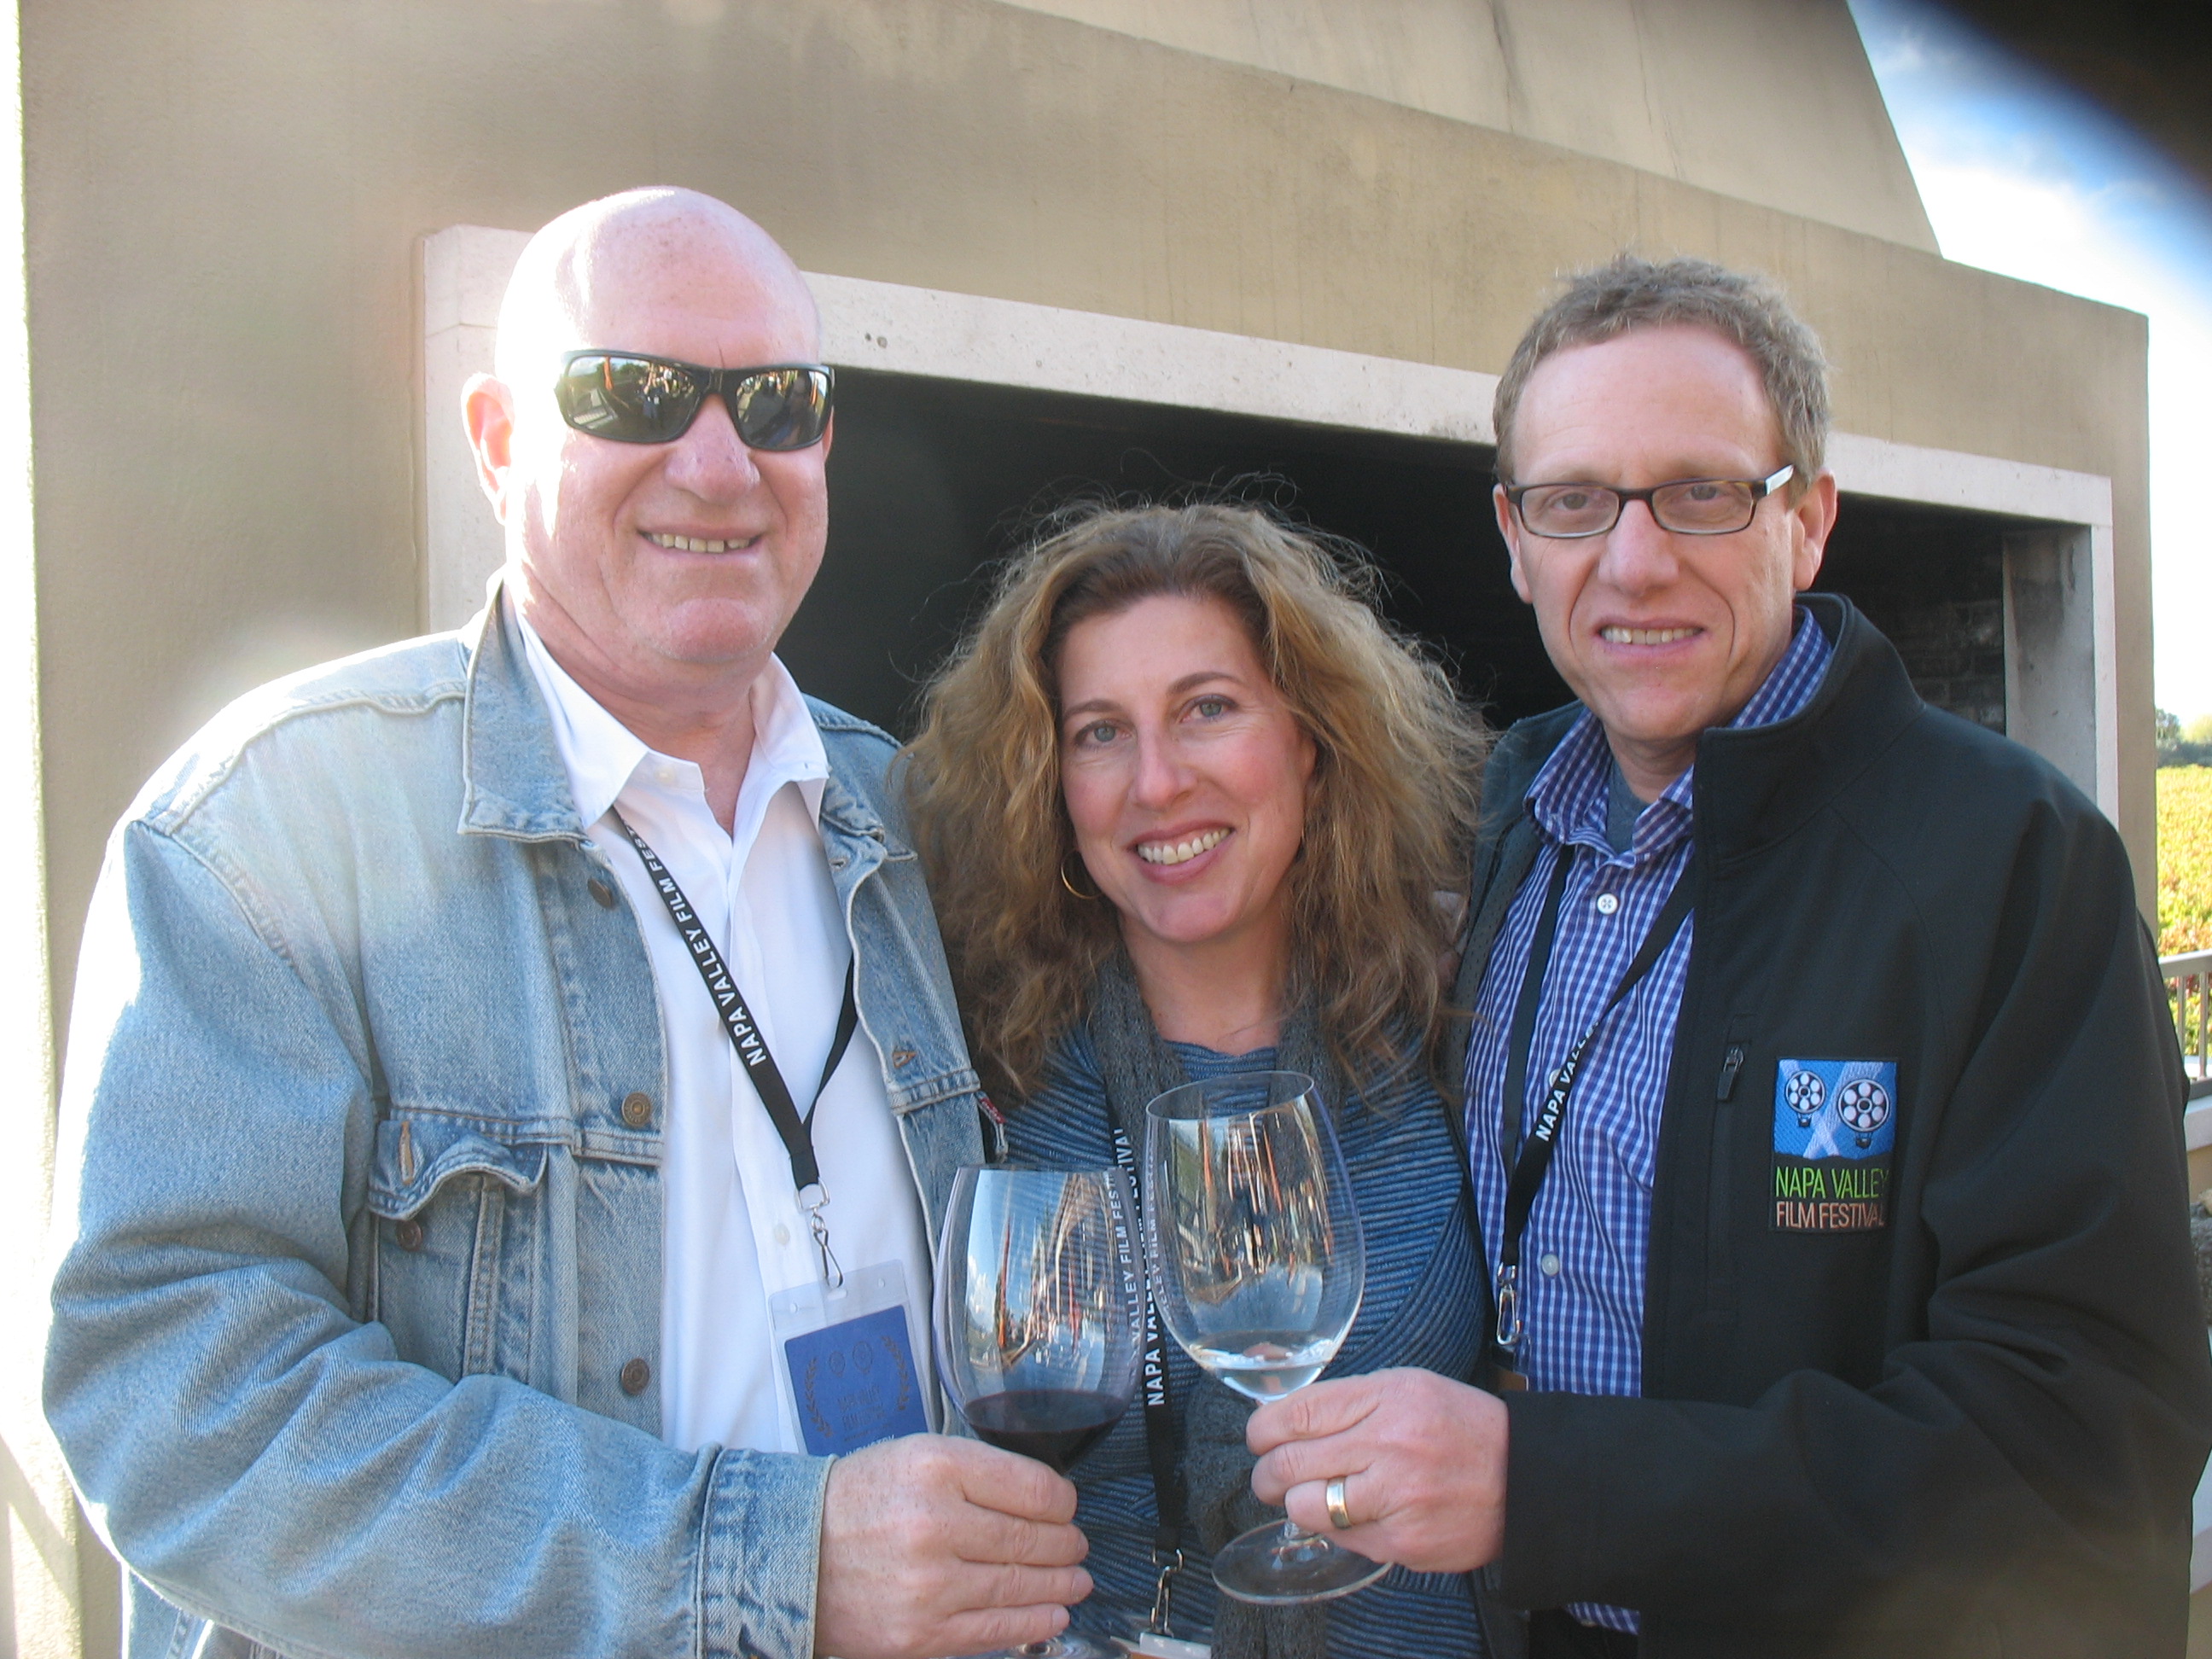 with Paul Zaentz and Marc Lhormer Napa Valley Film Festival 2012